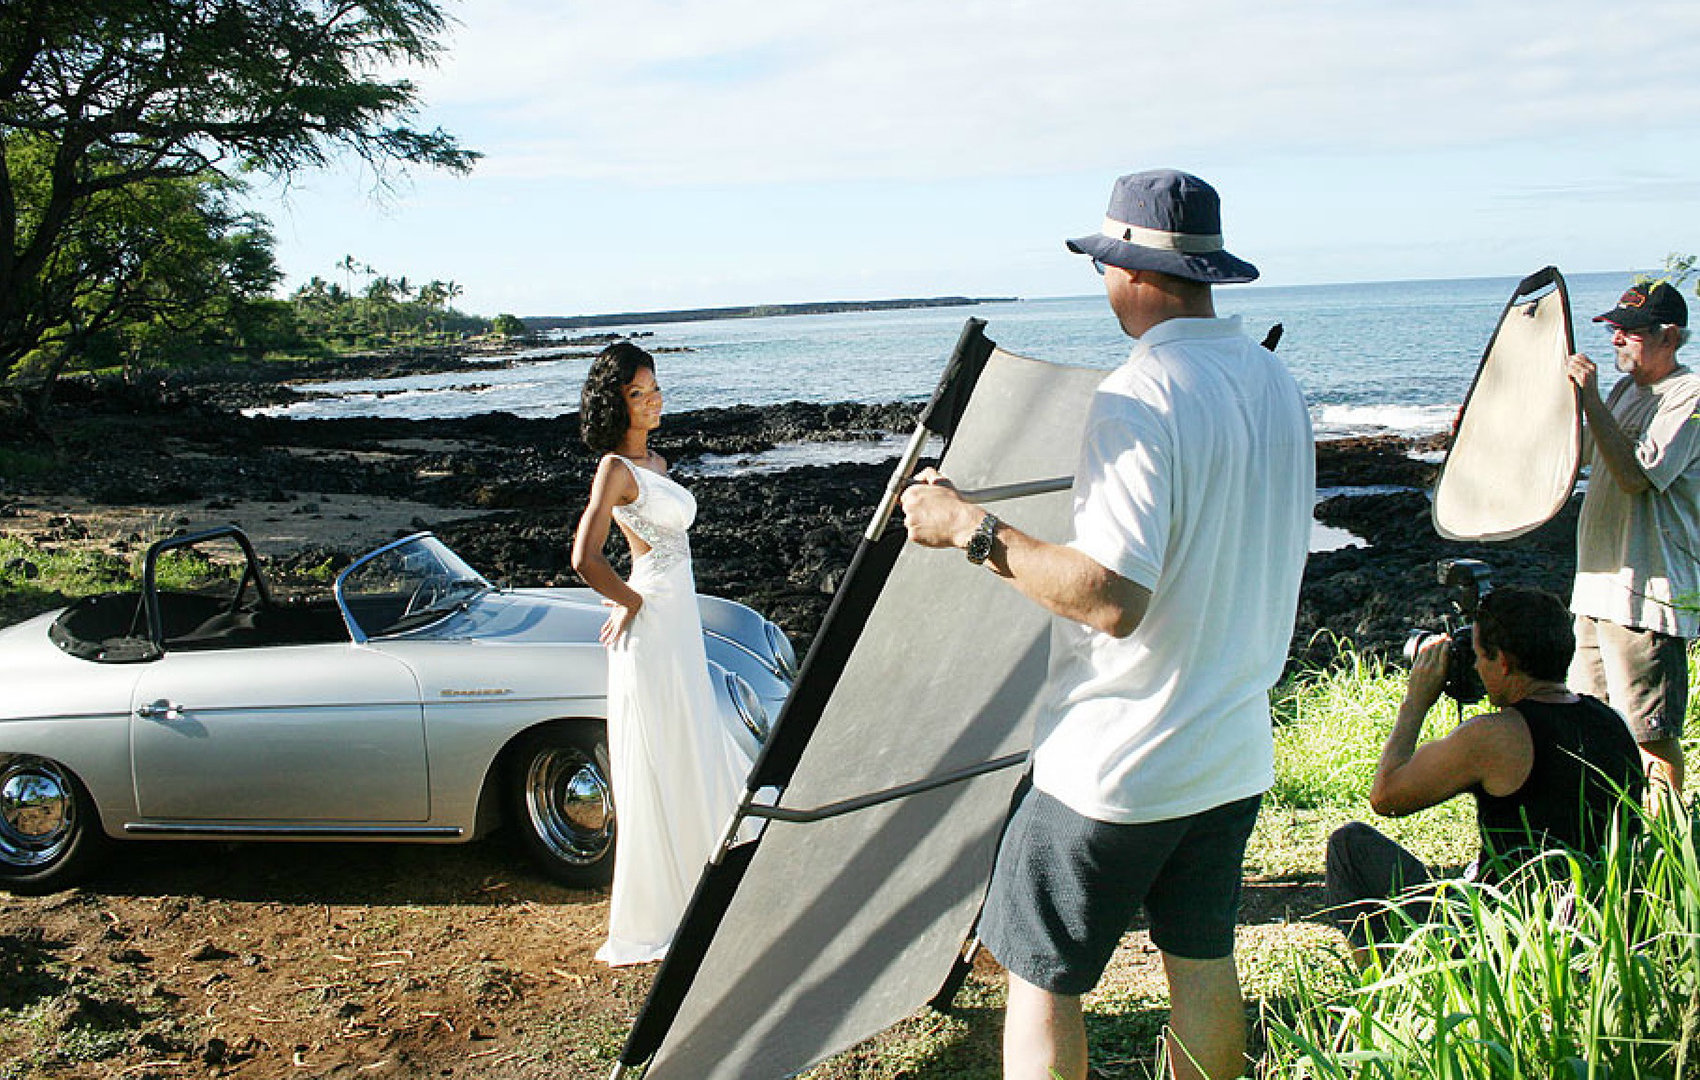 Behind the scenes photographers on Maui